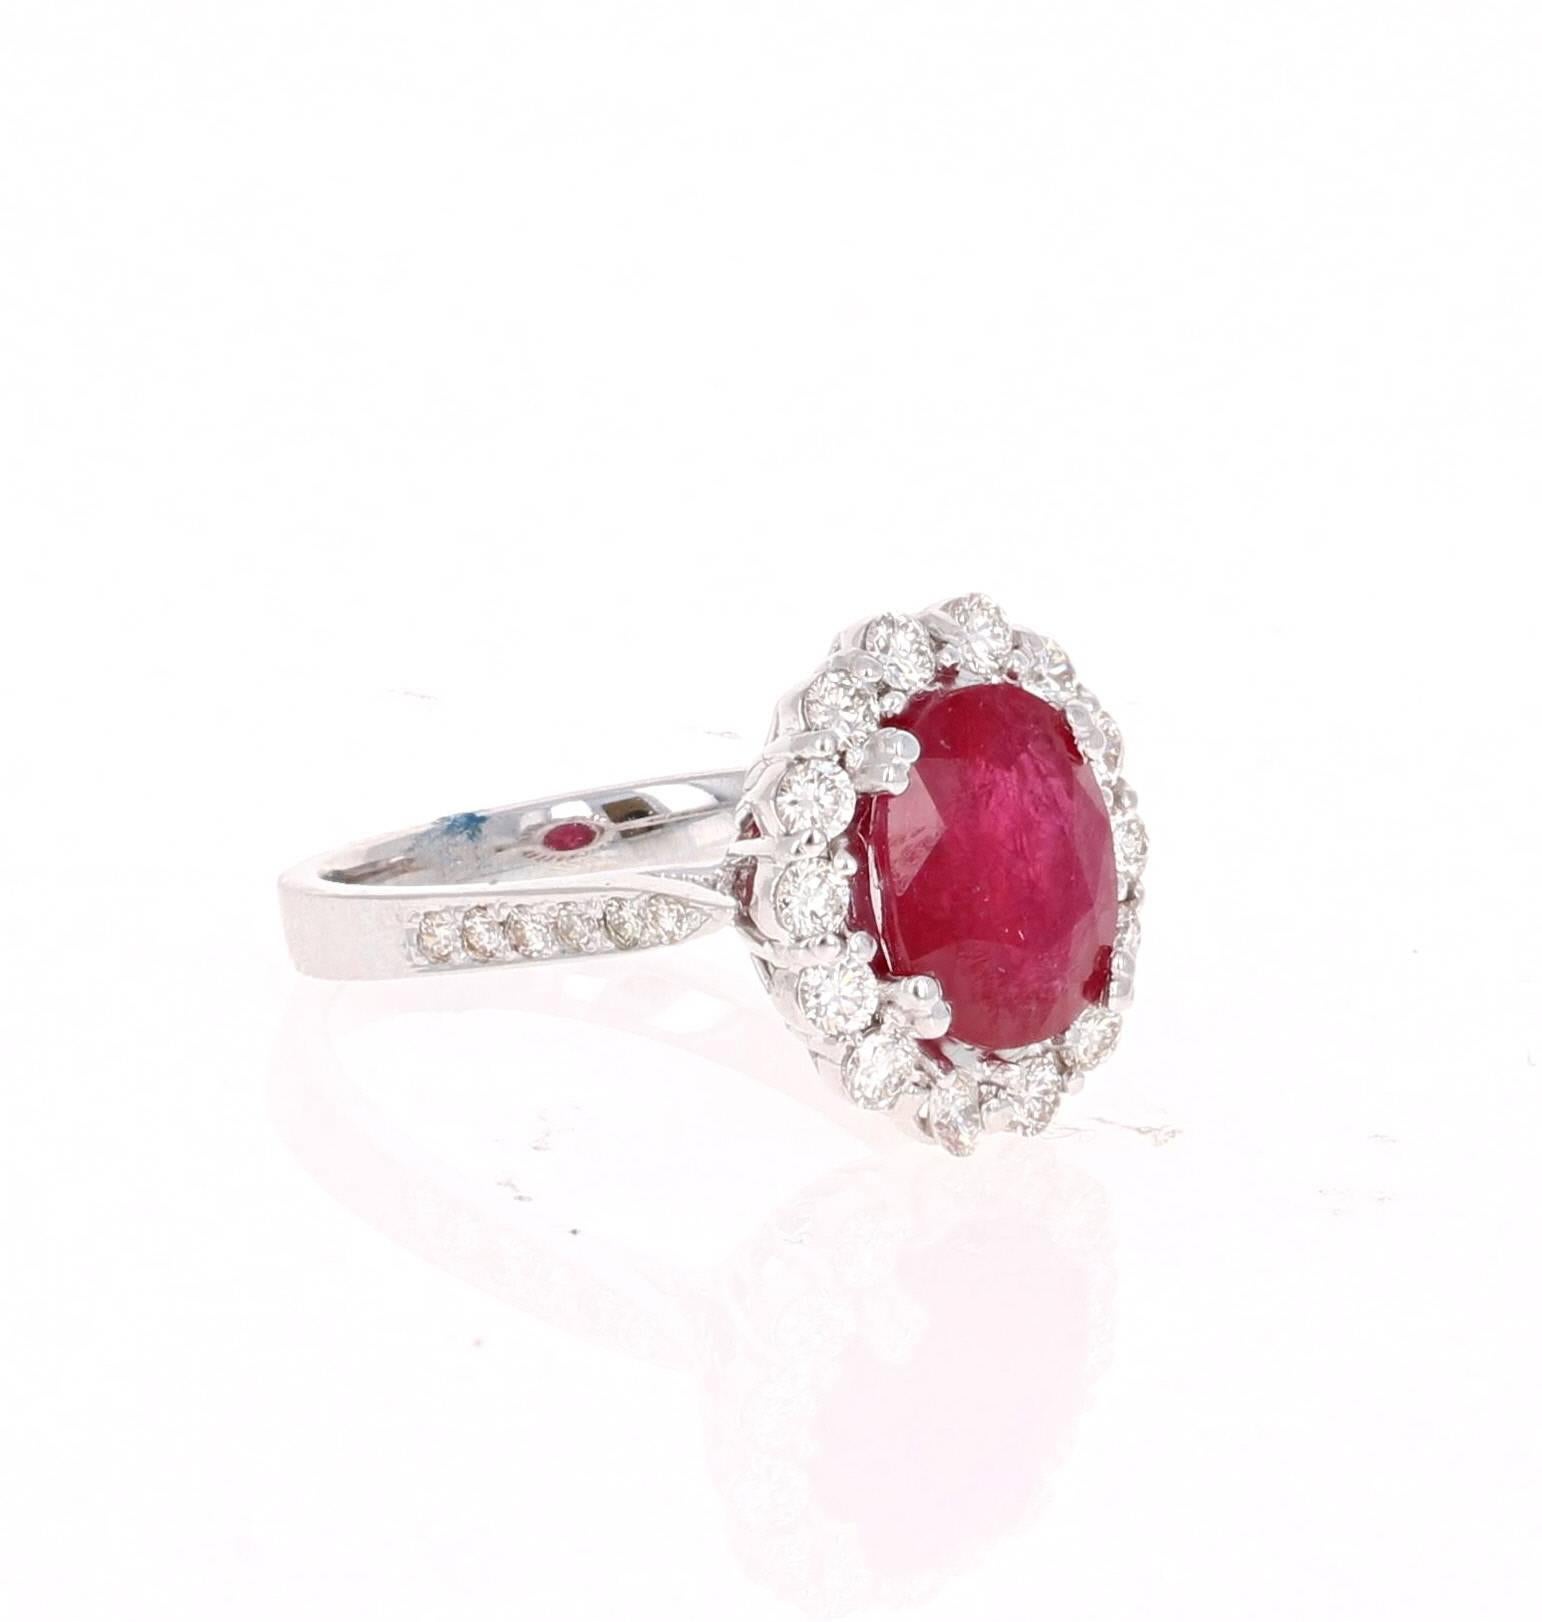 This classic design can transform into a modern Engagement/Promise ring!

It has an Oval Cut Ruby that is 3.28 Carats and is surrounded by 26 Round Cut Diamonds that weigh 0.70 carats (Clarity: VS2, Color: H). 
It is set delicately in 18K White Gold